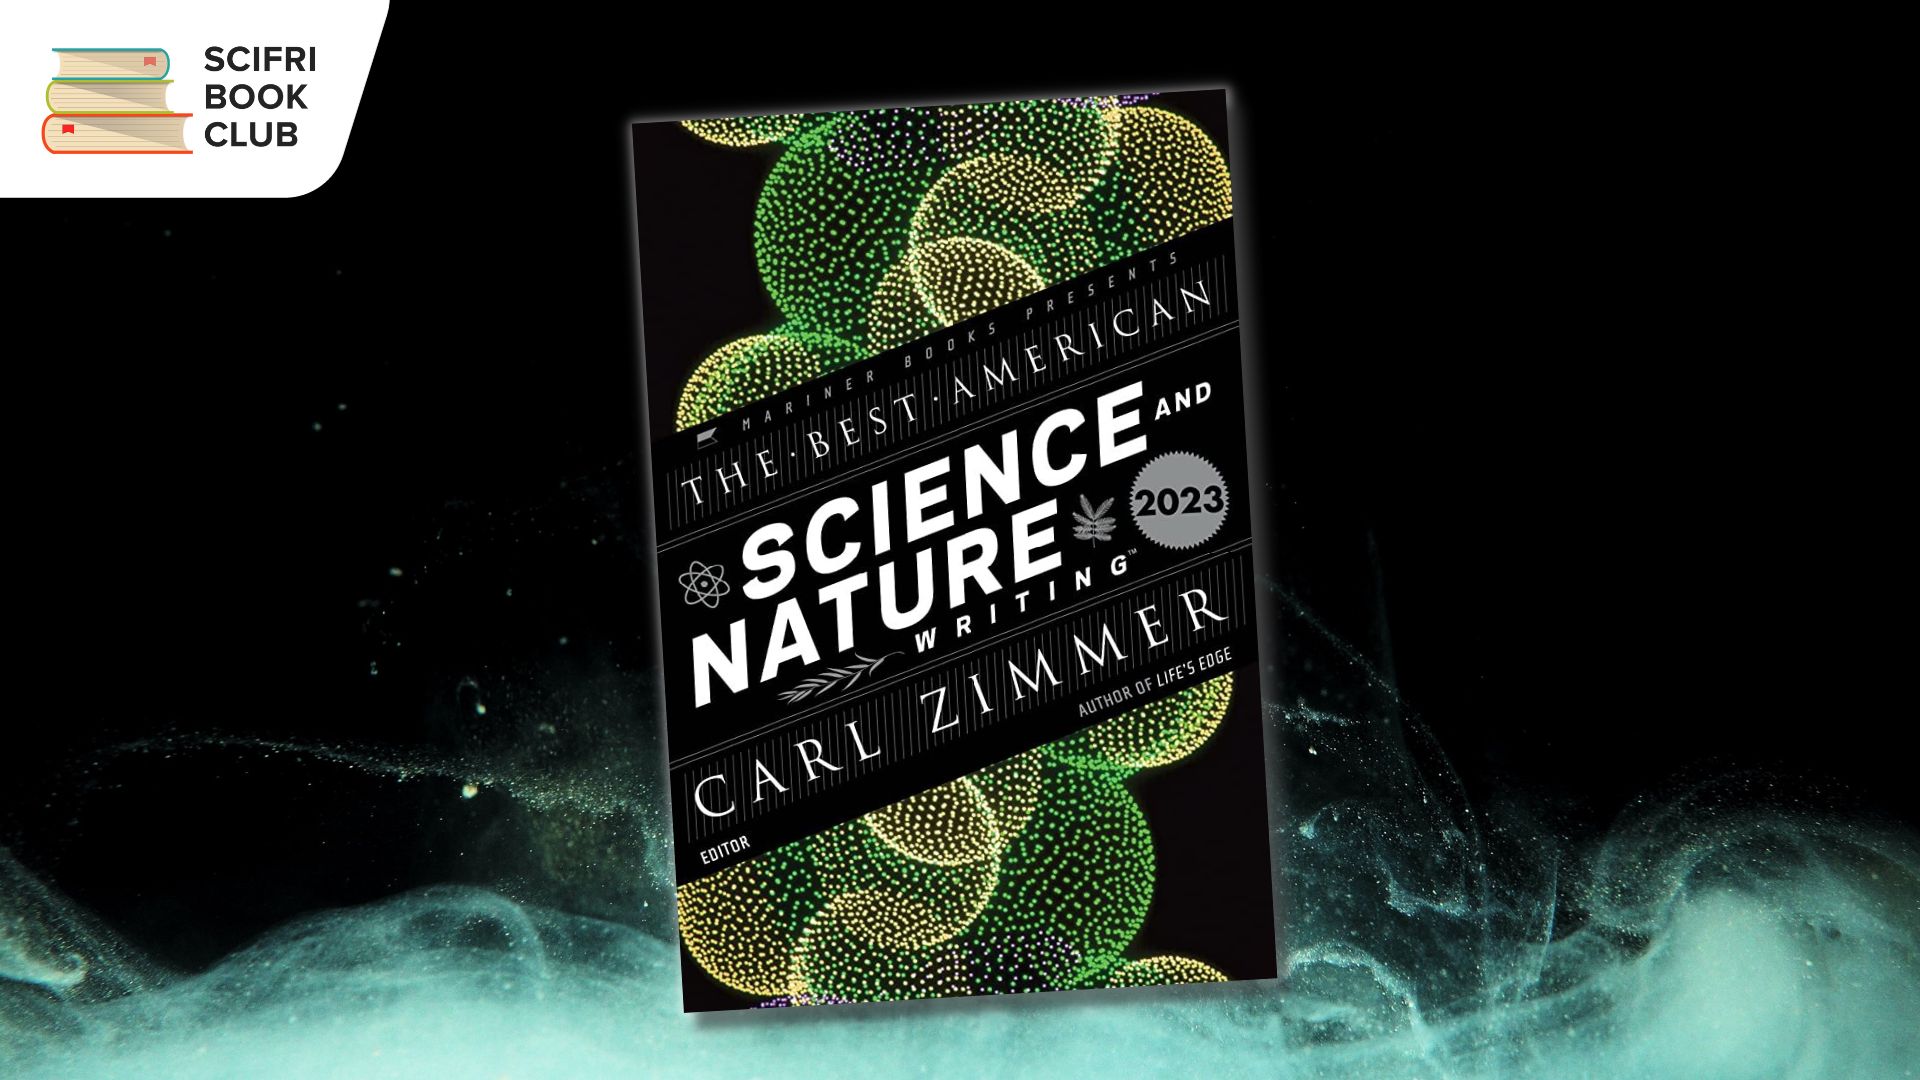 The book cover of THE BEST AMERICAN SCIENCE AND NATURE WRITING 2023 edited by Carl Zimmer in the middle, with a photo background featuring a swirling wave of green-blue mist. The logo for the SciFri Book Club in the top left corner.